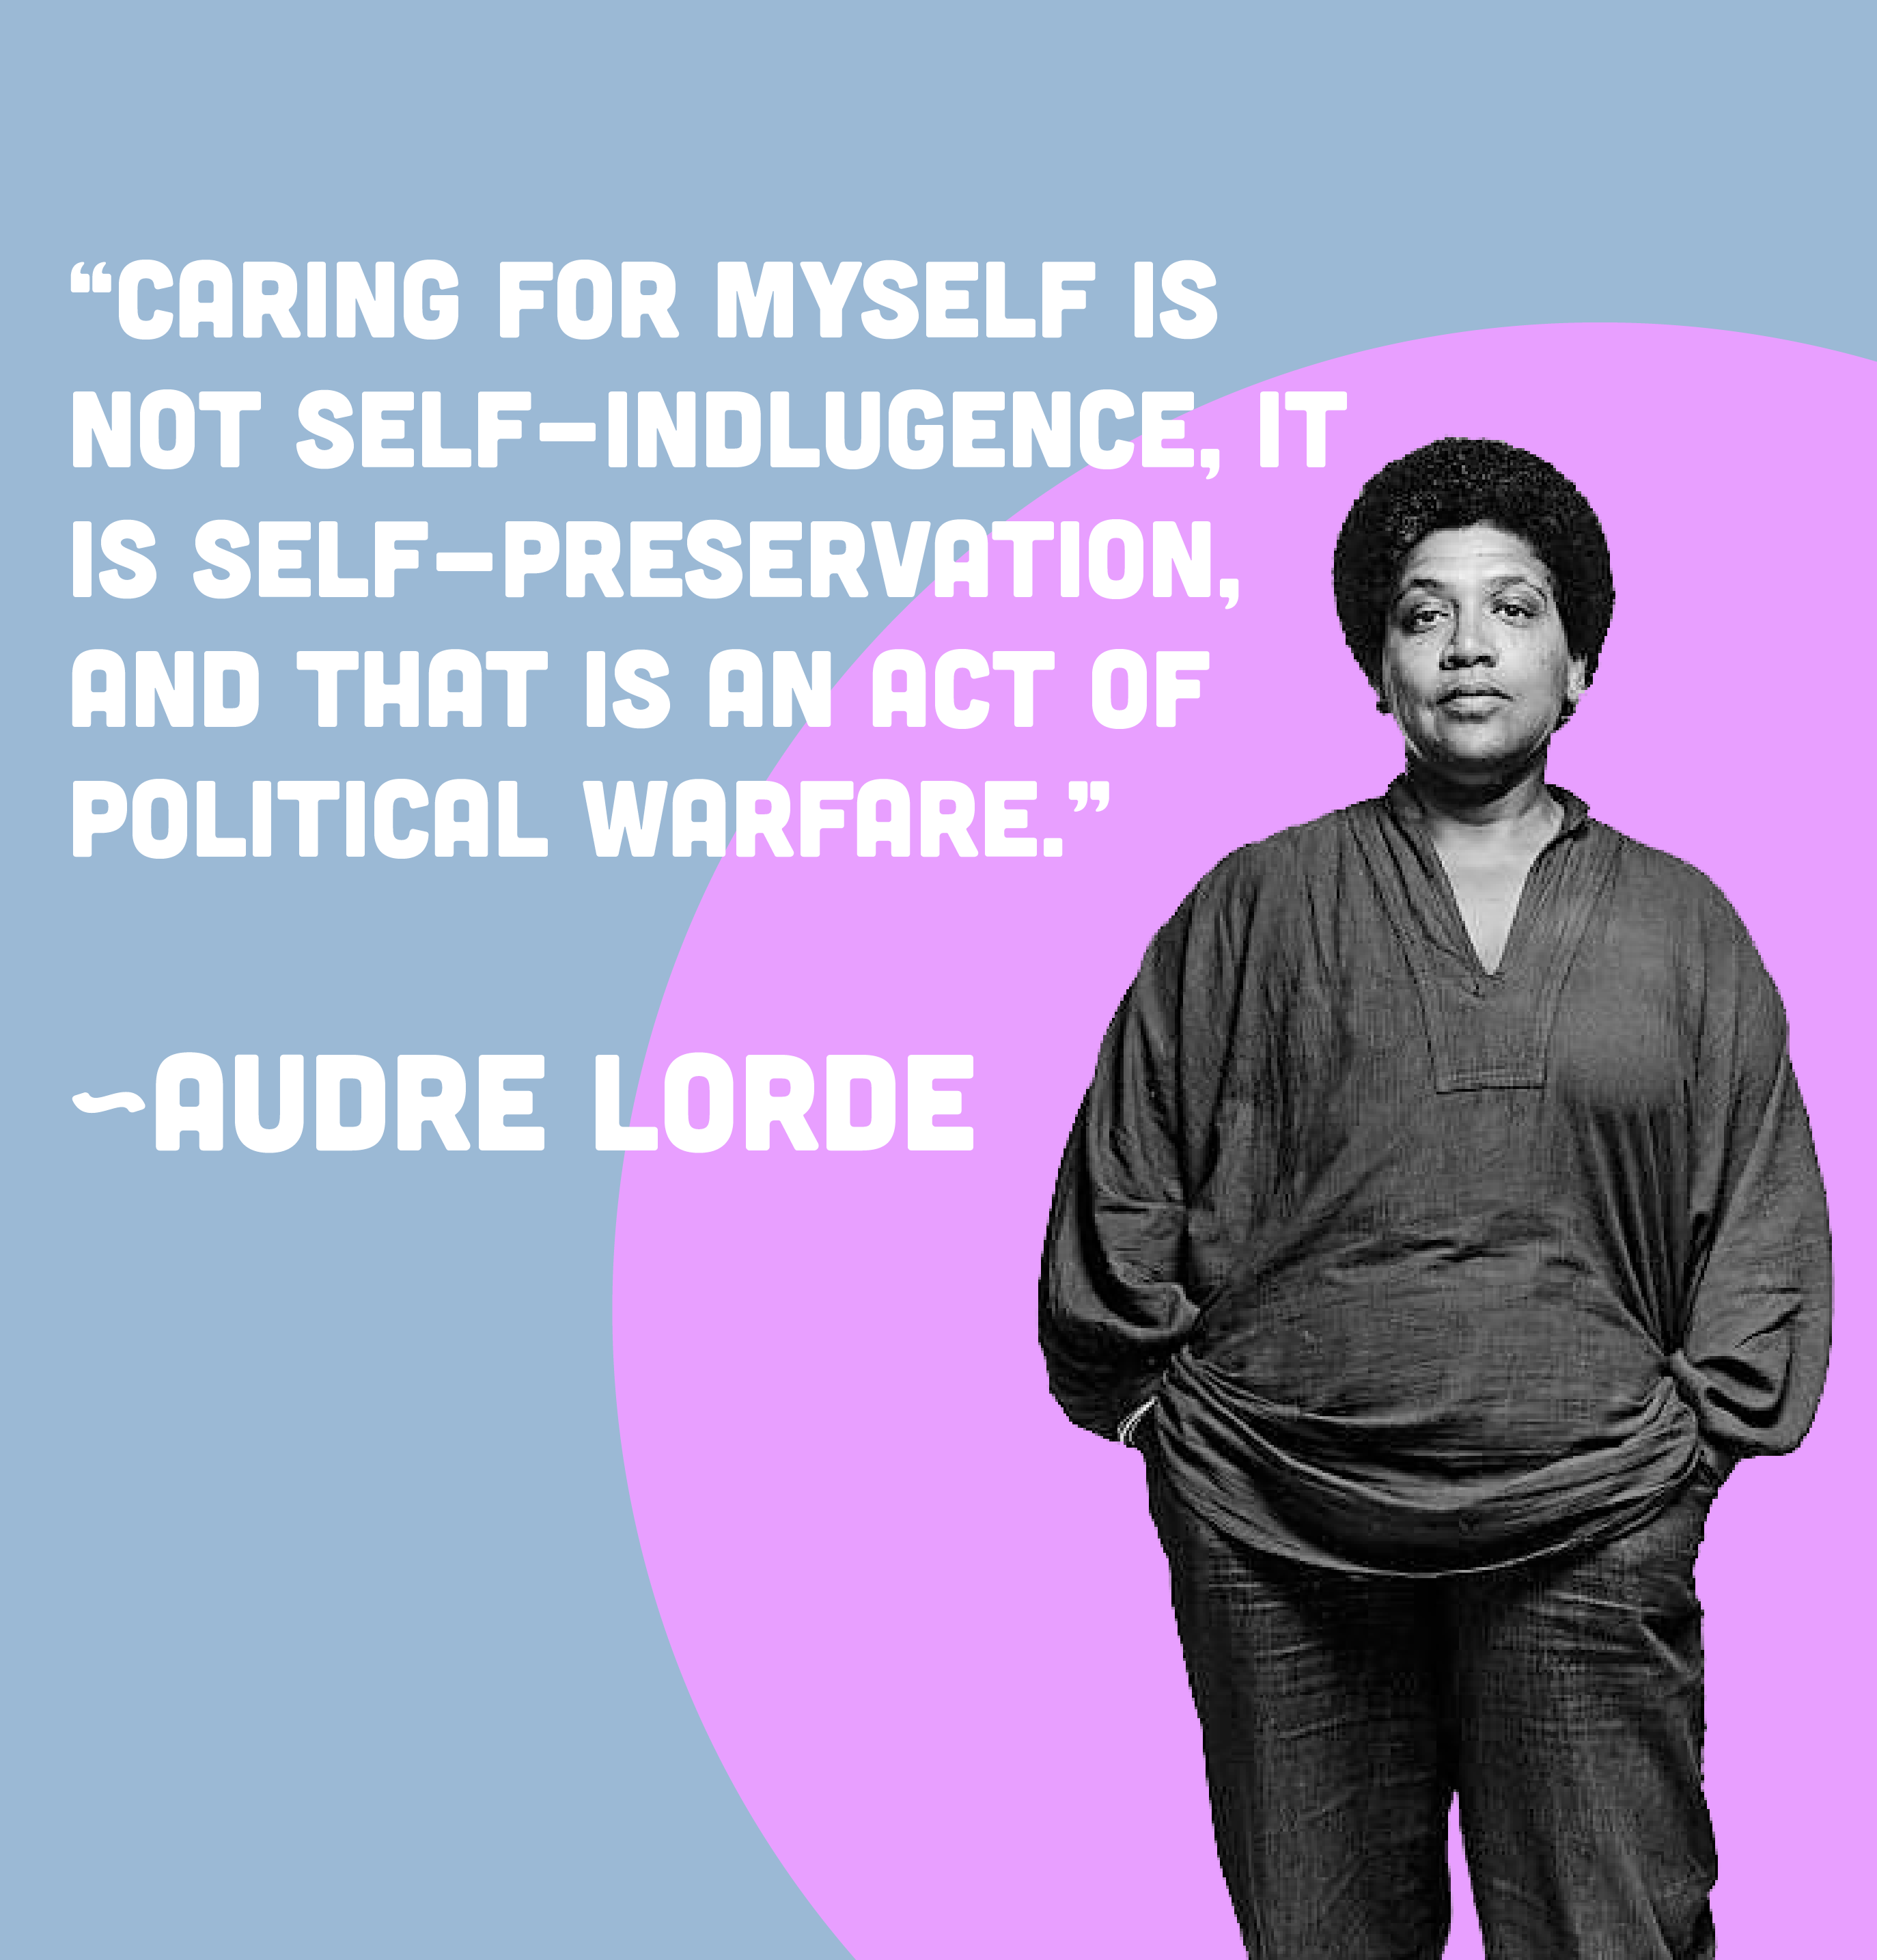 Quote from Audre Lorde: "Caring for myself is not self-indulgence, it is self-preservation, and that is an act of political warfare."